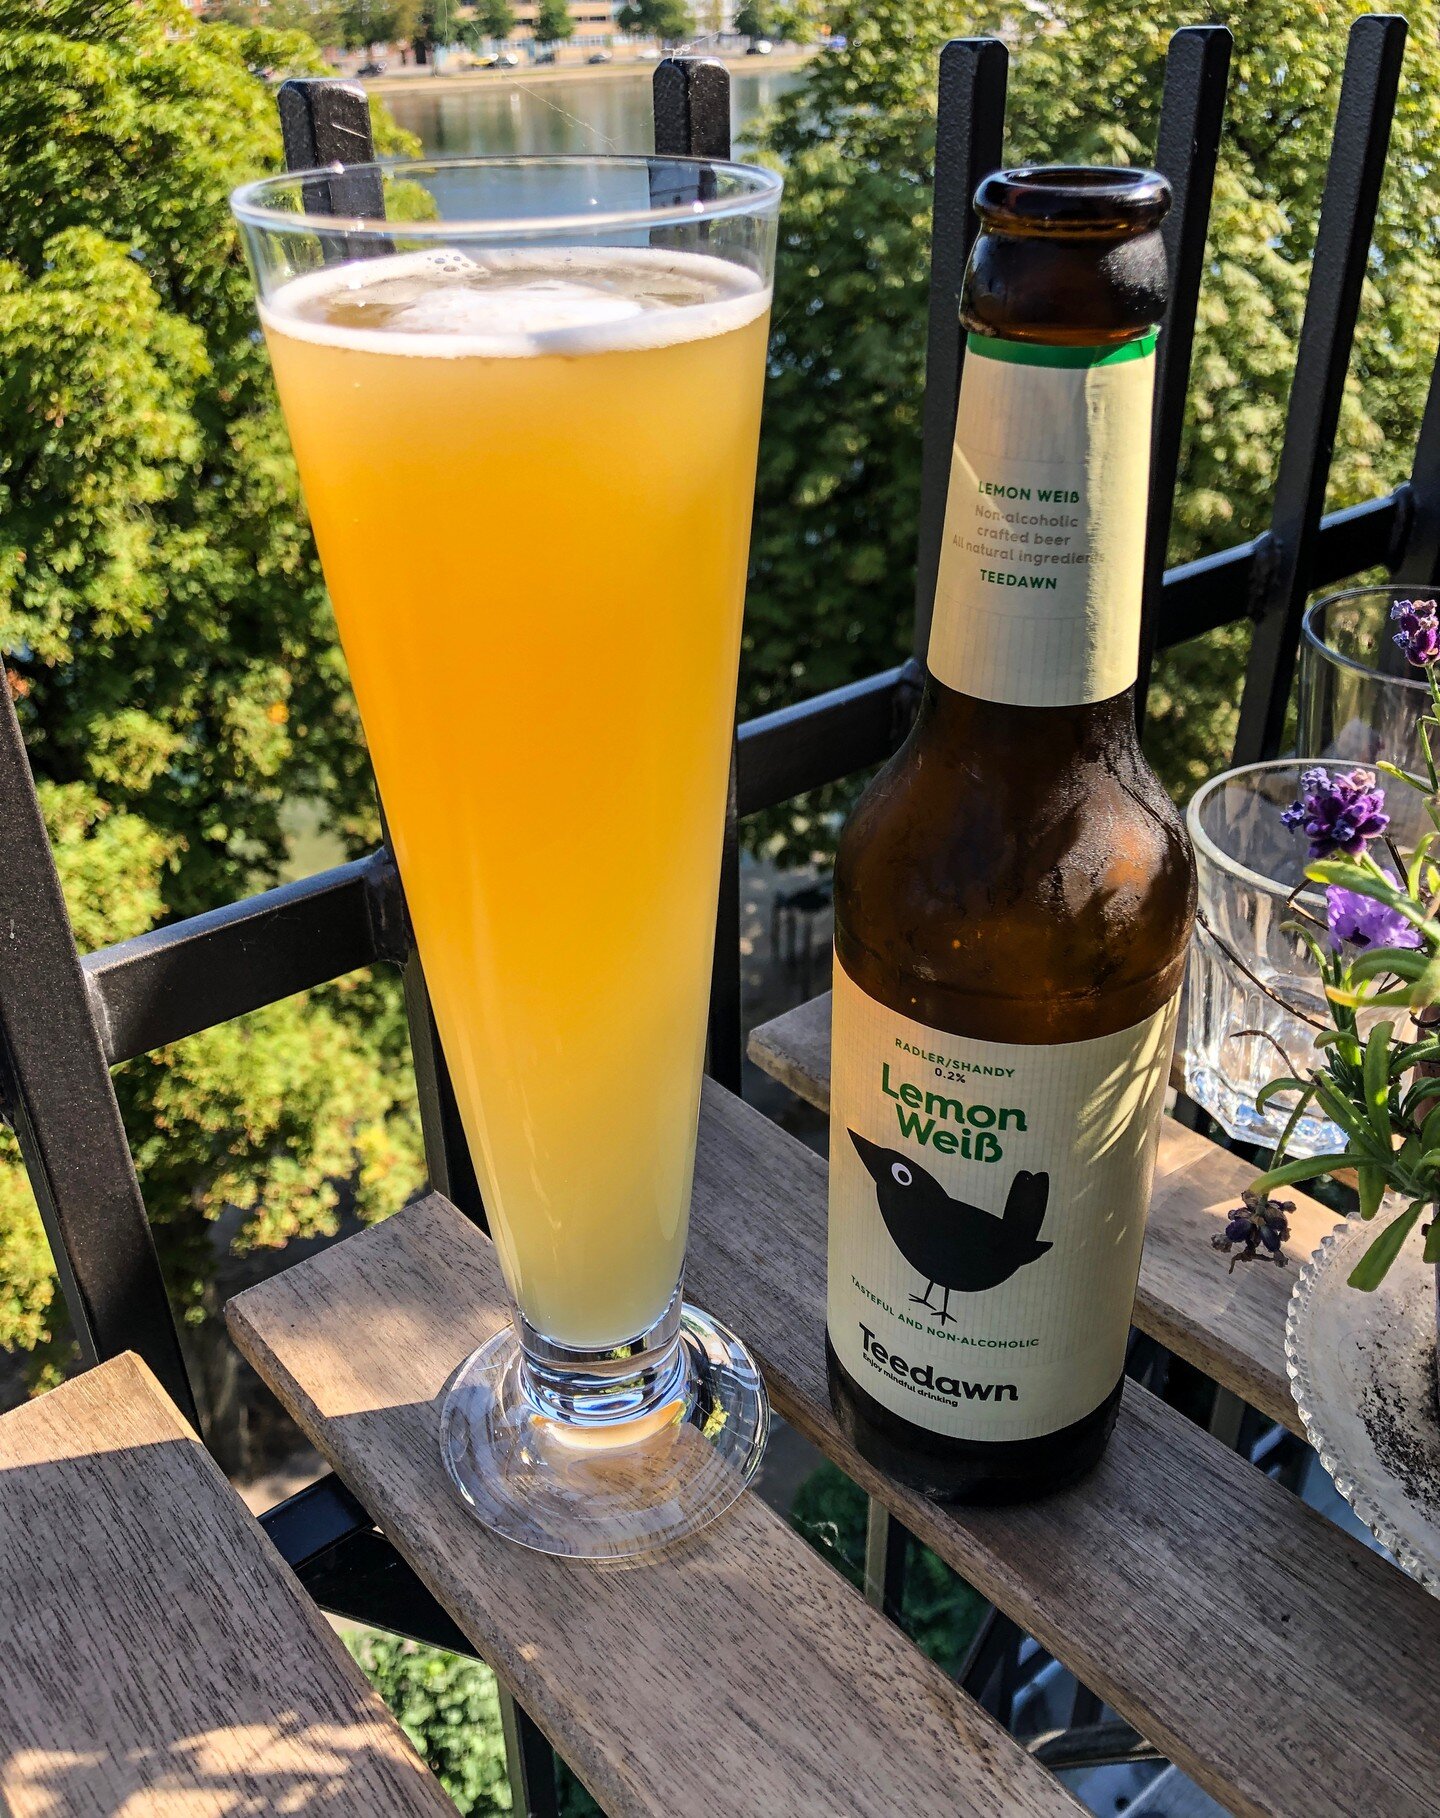 The Danish weather suits perfect for Lemon Wei&szlig;, the most perfected non-alcoholic Radler, brewed on Bavarian Castle Wheat beer and natural Citrus lemonade. Enjoy. 
#lemonwei&szlig; #lemonweisse #radler #nonalcoholic